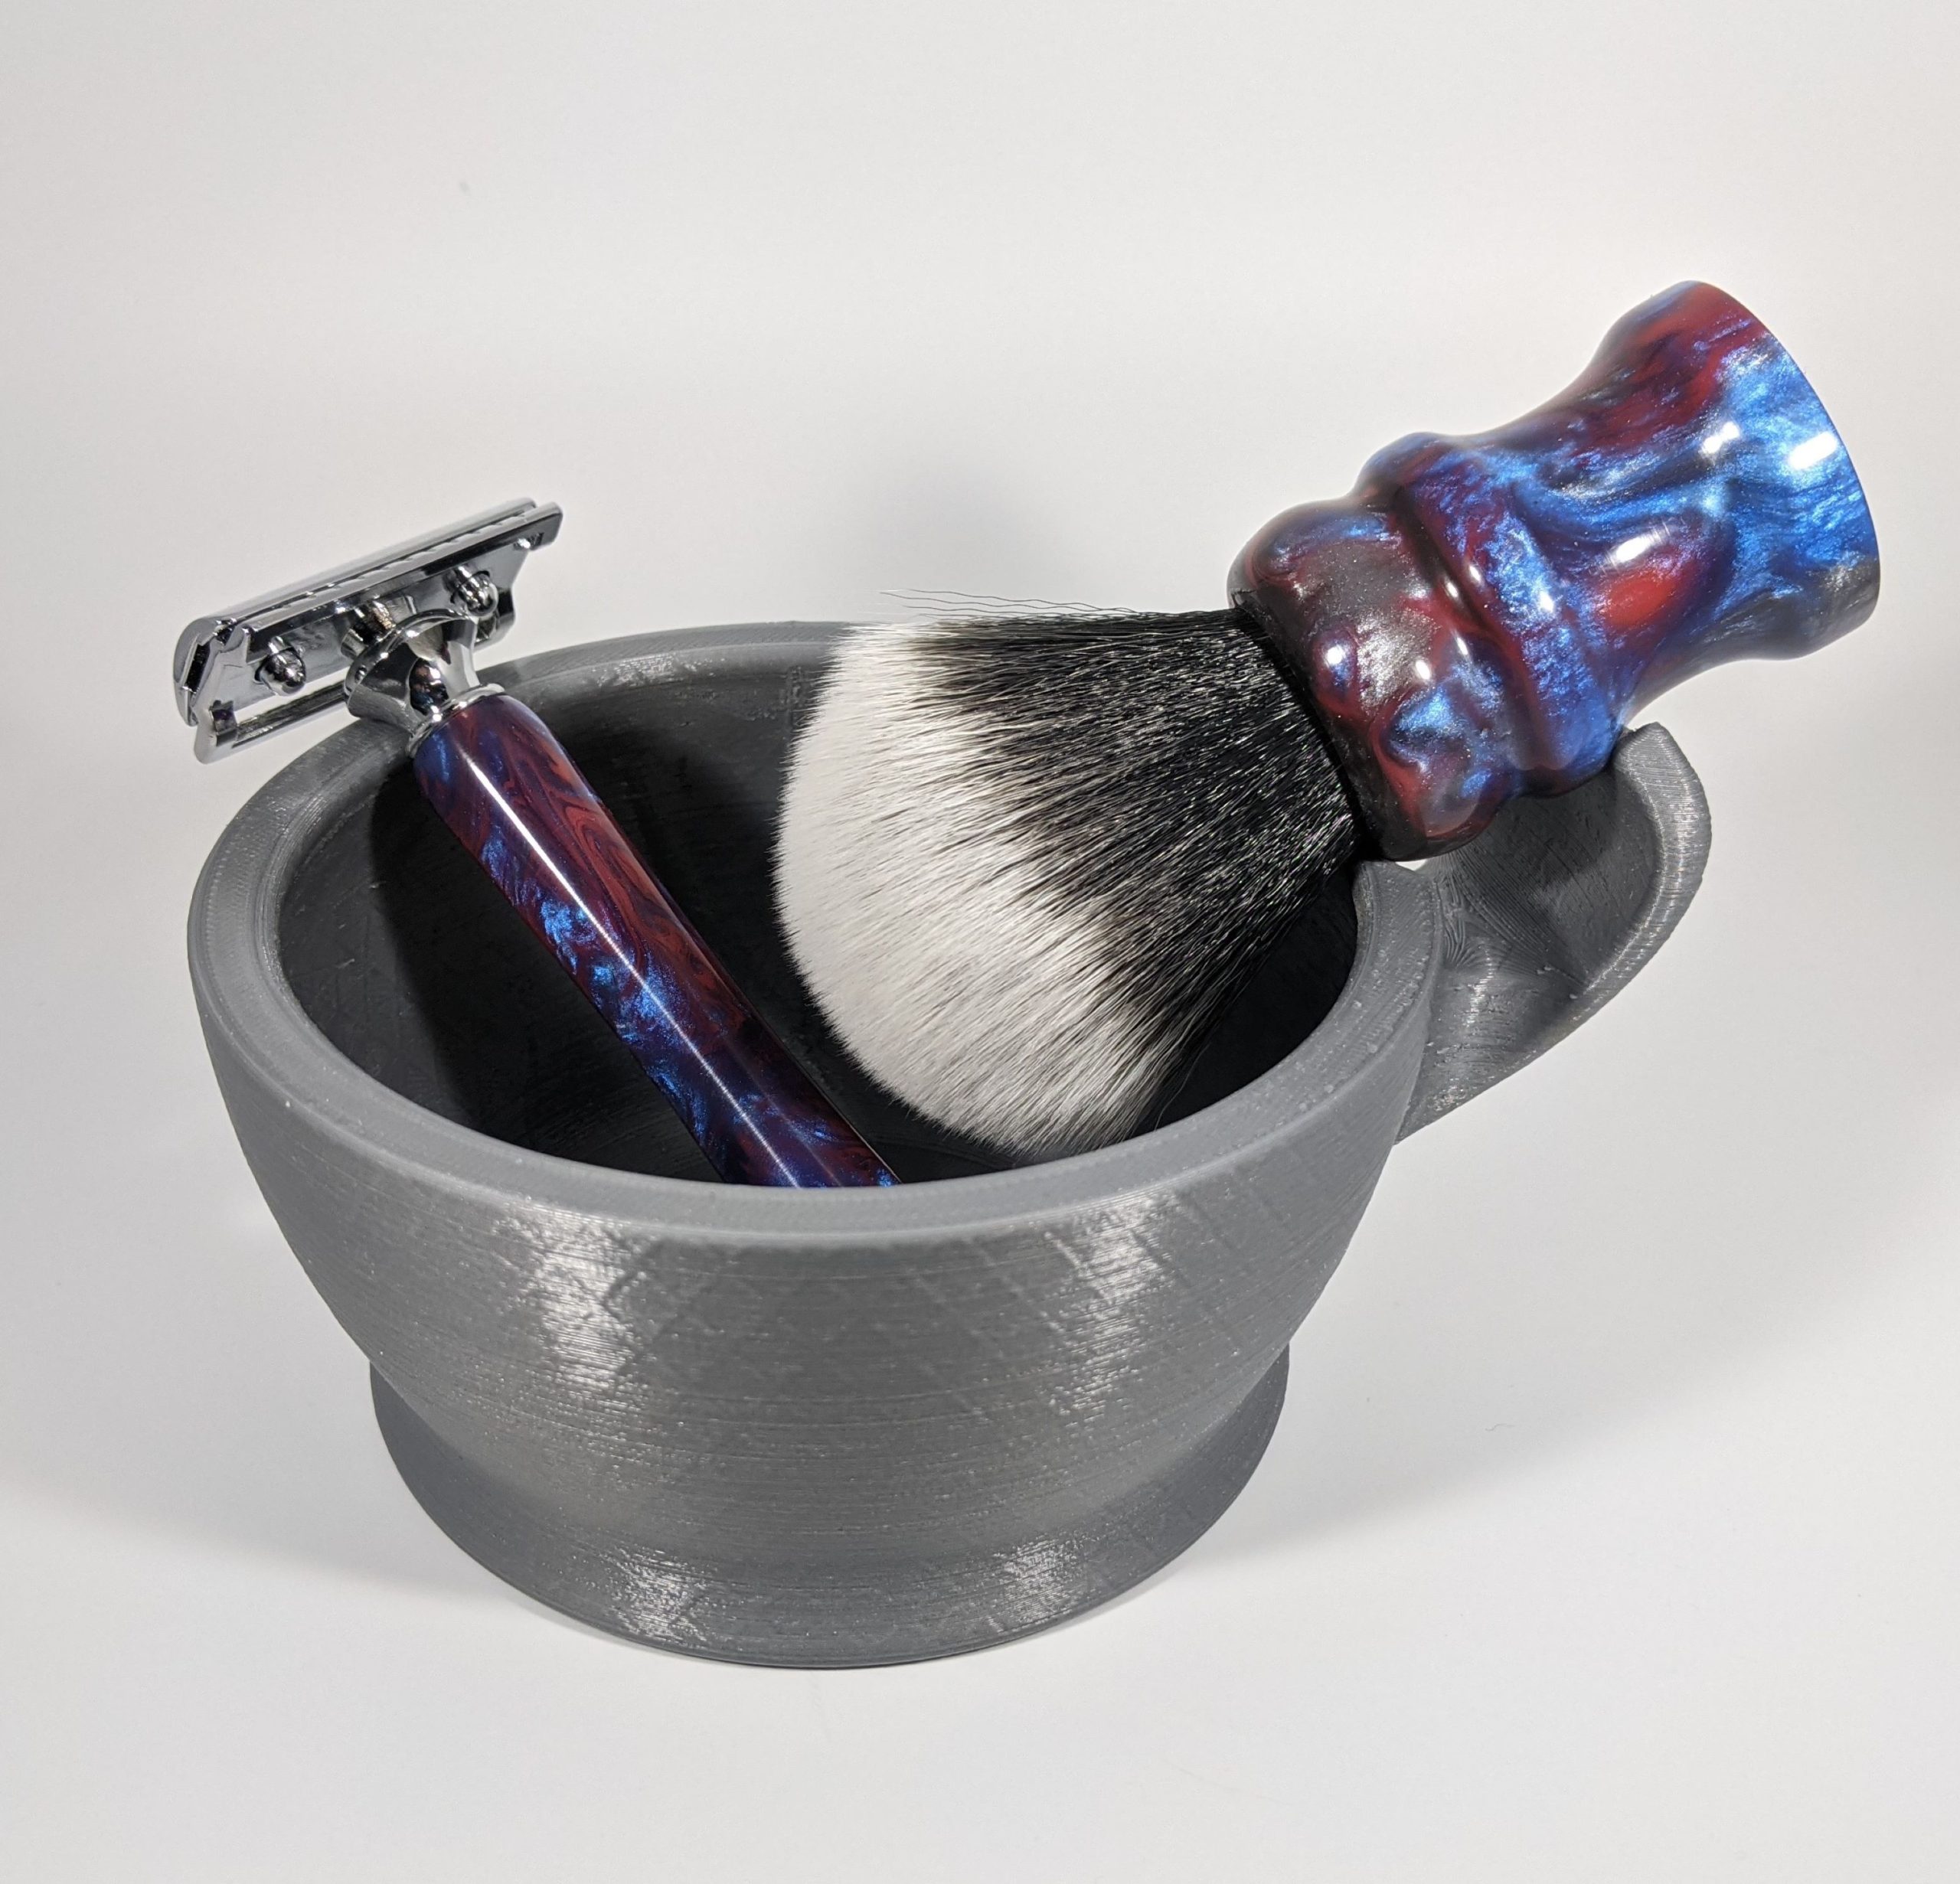 Shave set created and donated for an annual cancer fundraiser. This set raised $180.